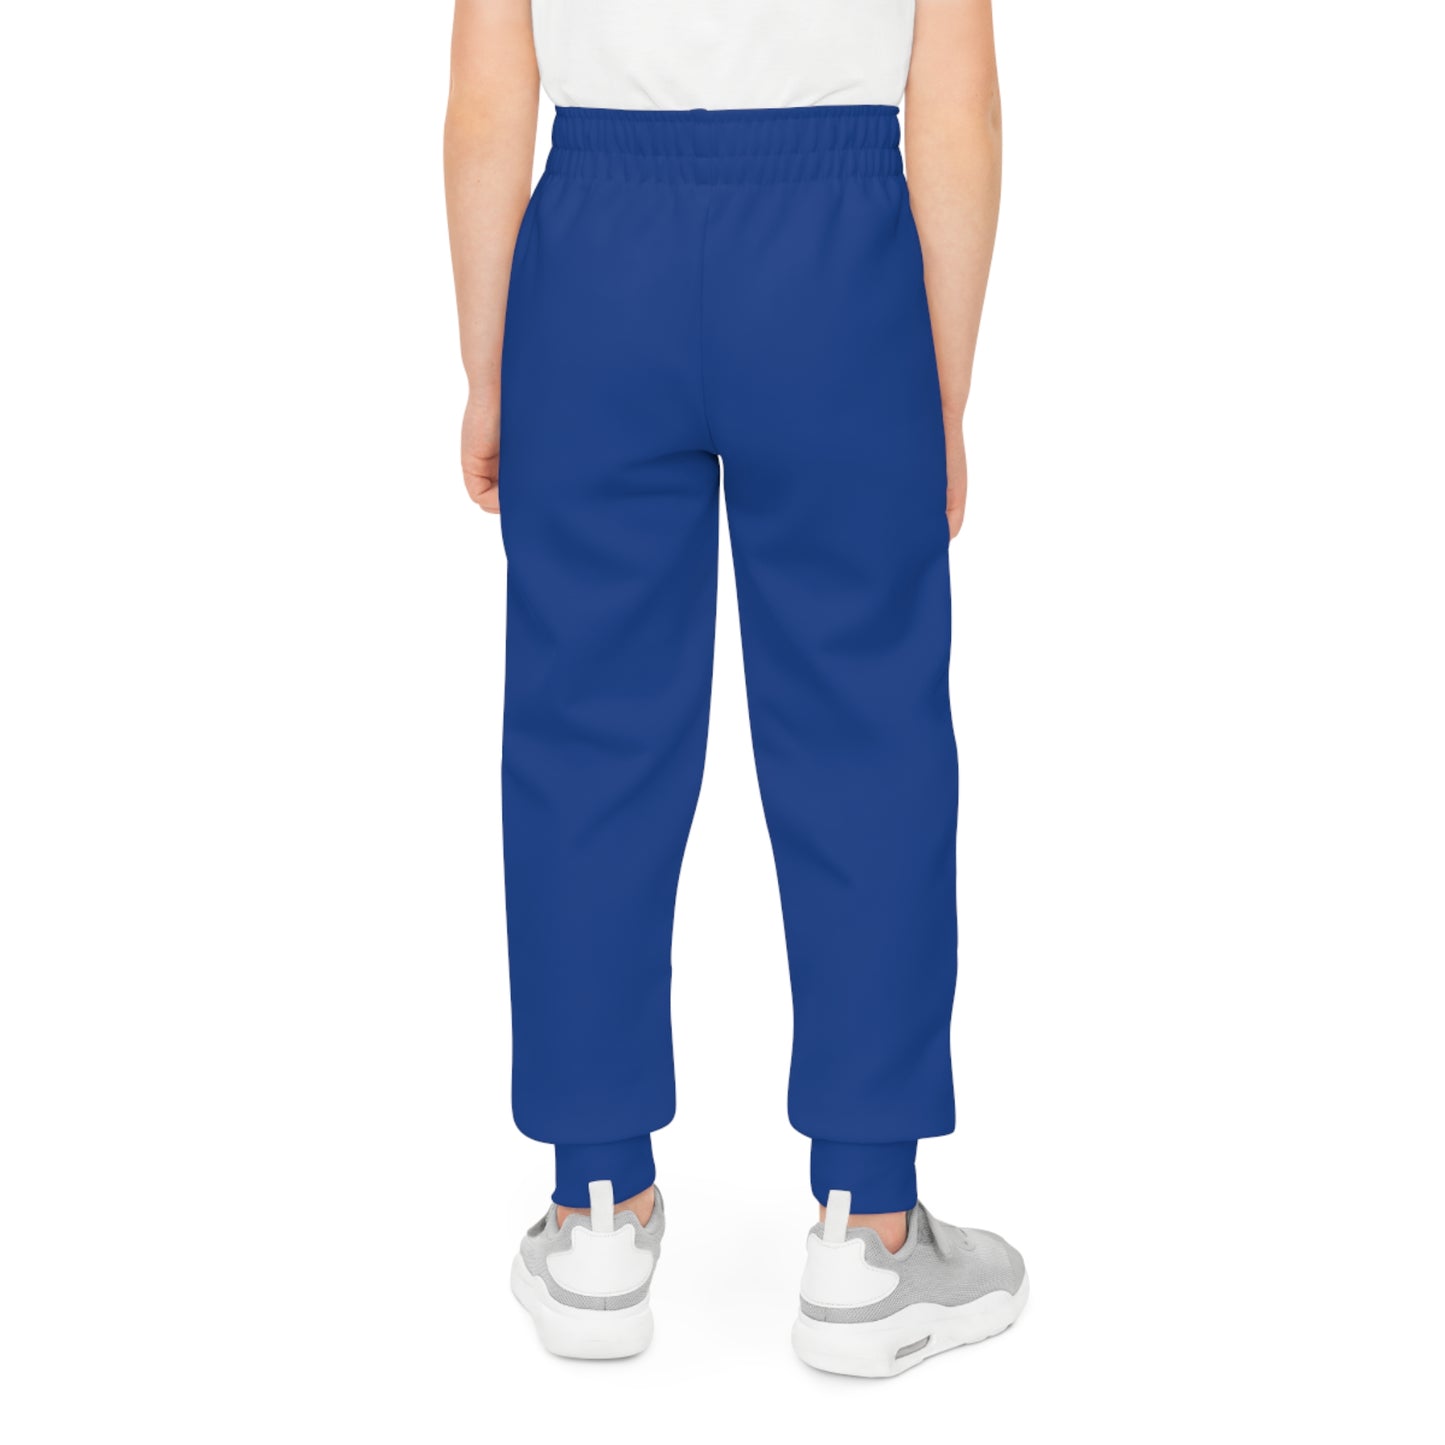 Fly Dre Youth Joggers